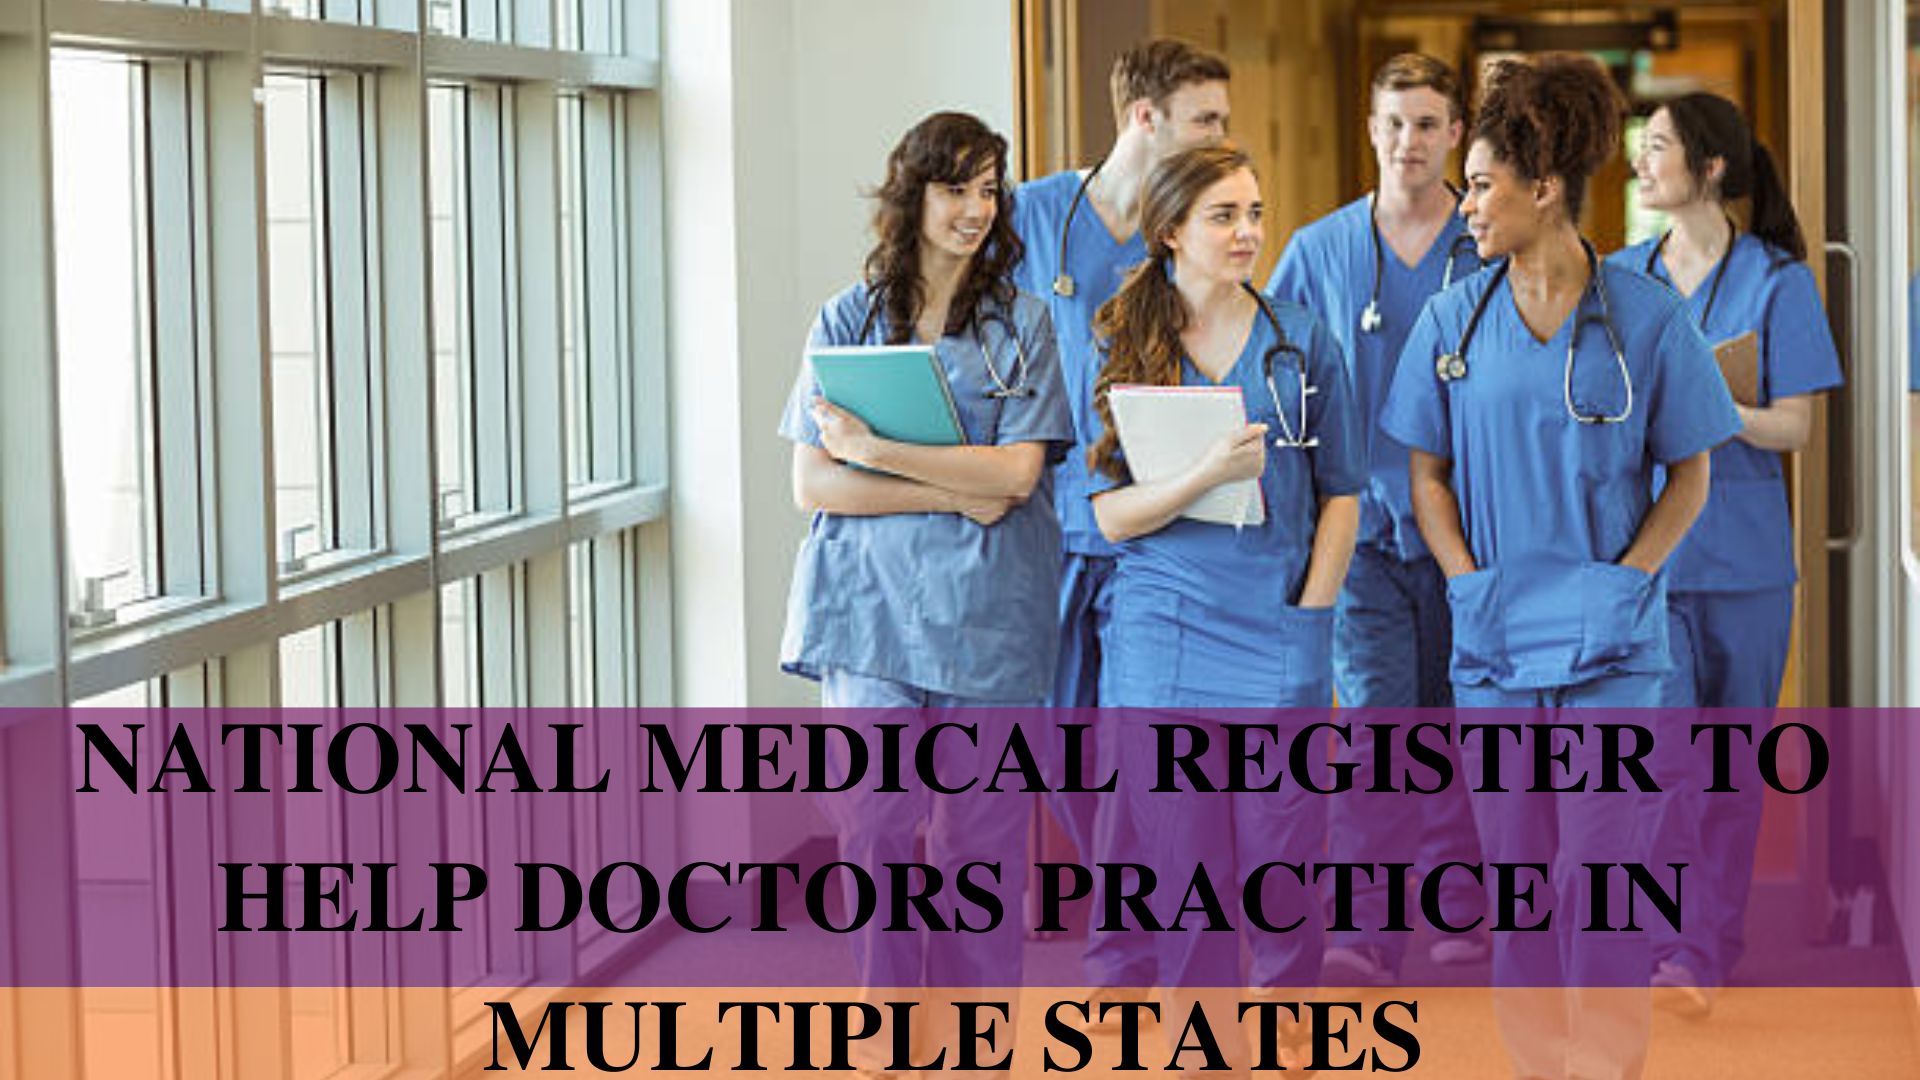 NMC's National Medical Register To Help Doctors Practice In Multiple States